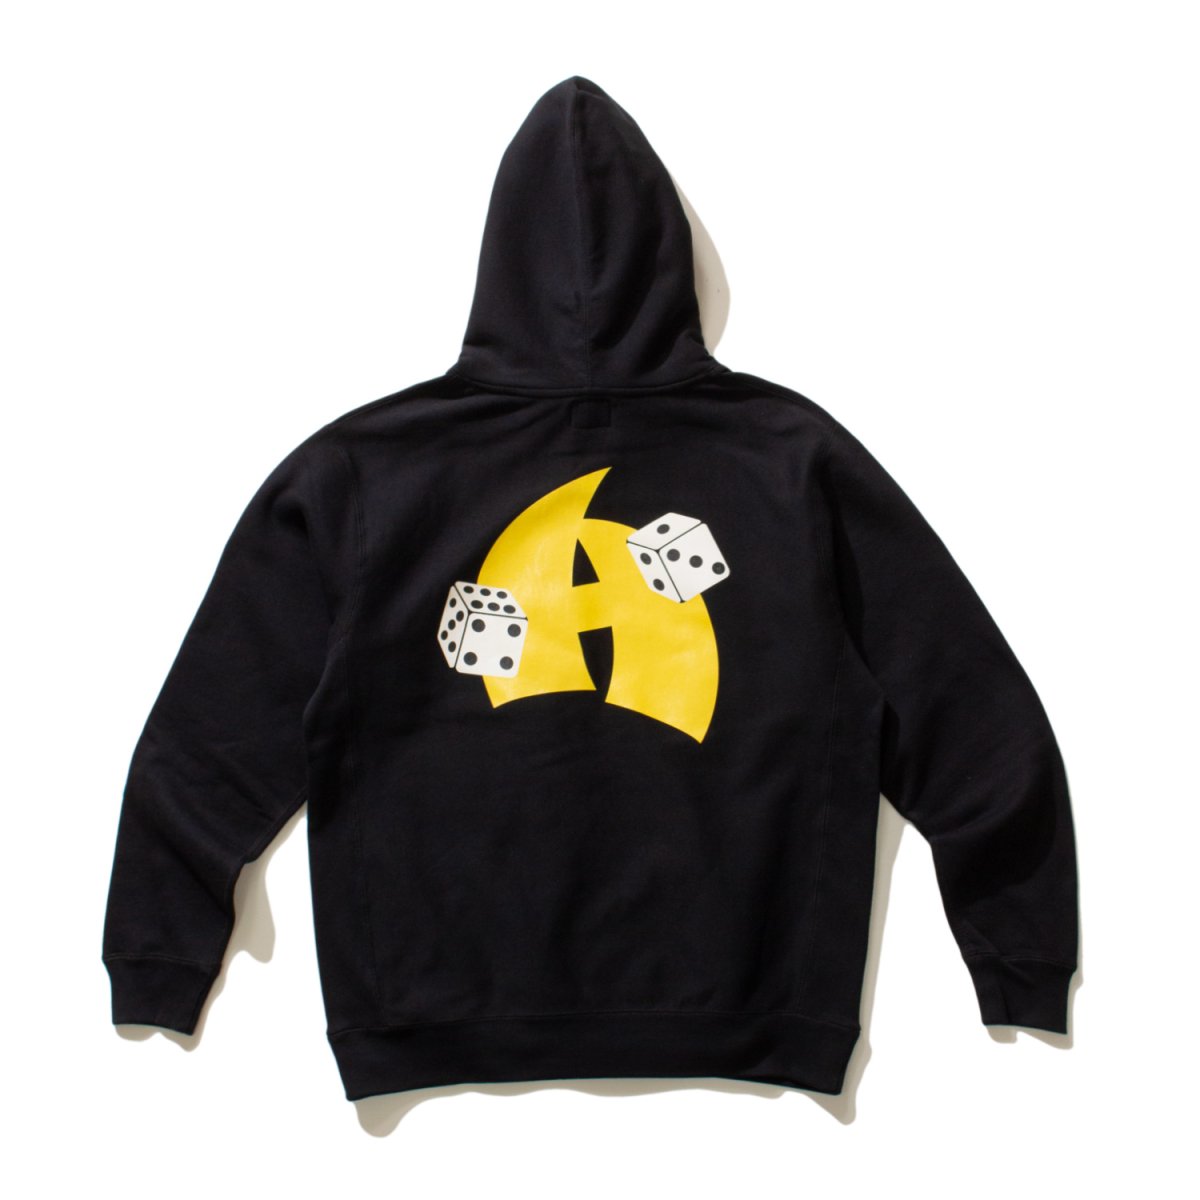 ACAPULCO GOLD | GAME OF DEATH HOODED SWEATSHIRT | ACAPULCO GOLD正規取扱いショップ